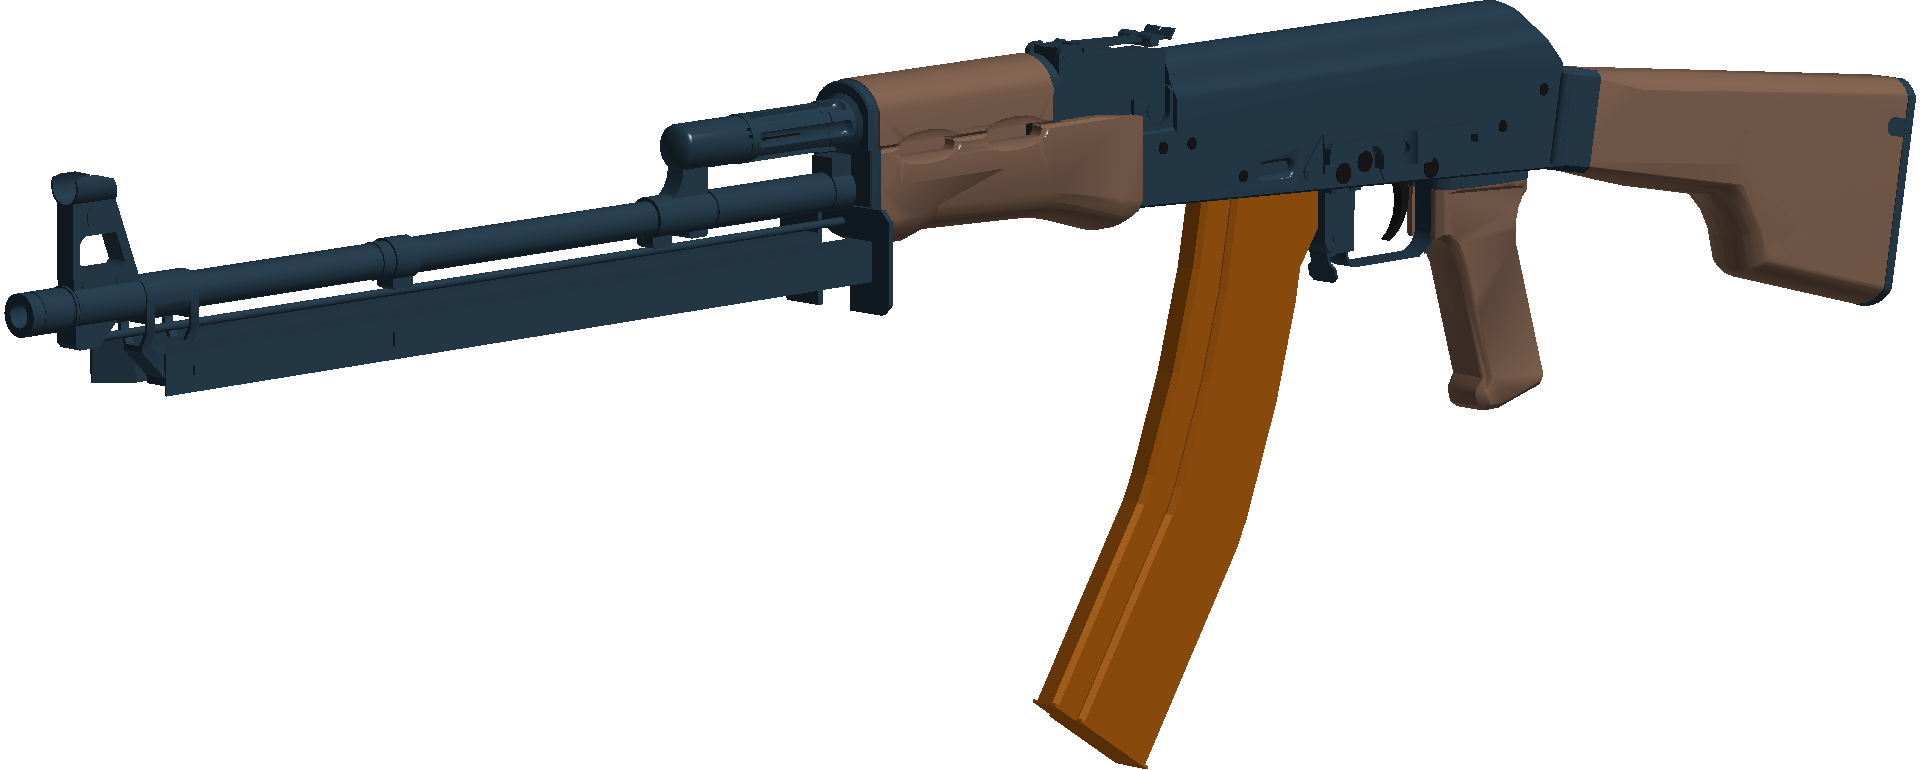 Phantom Forces Wiki - Roblox Phantom Forces M60, HD Png Download